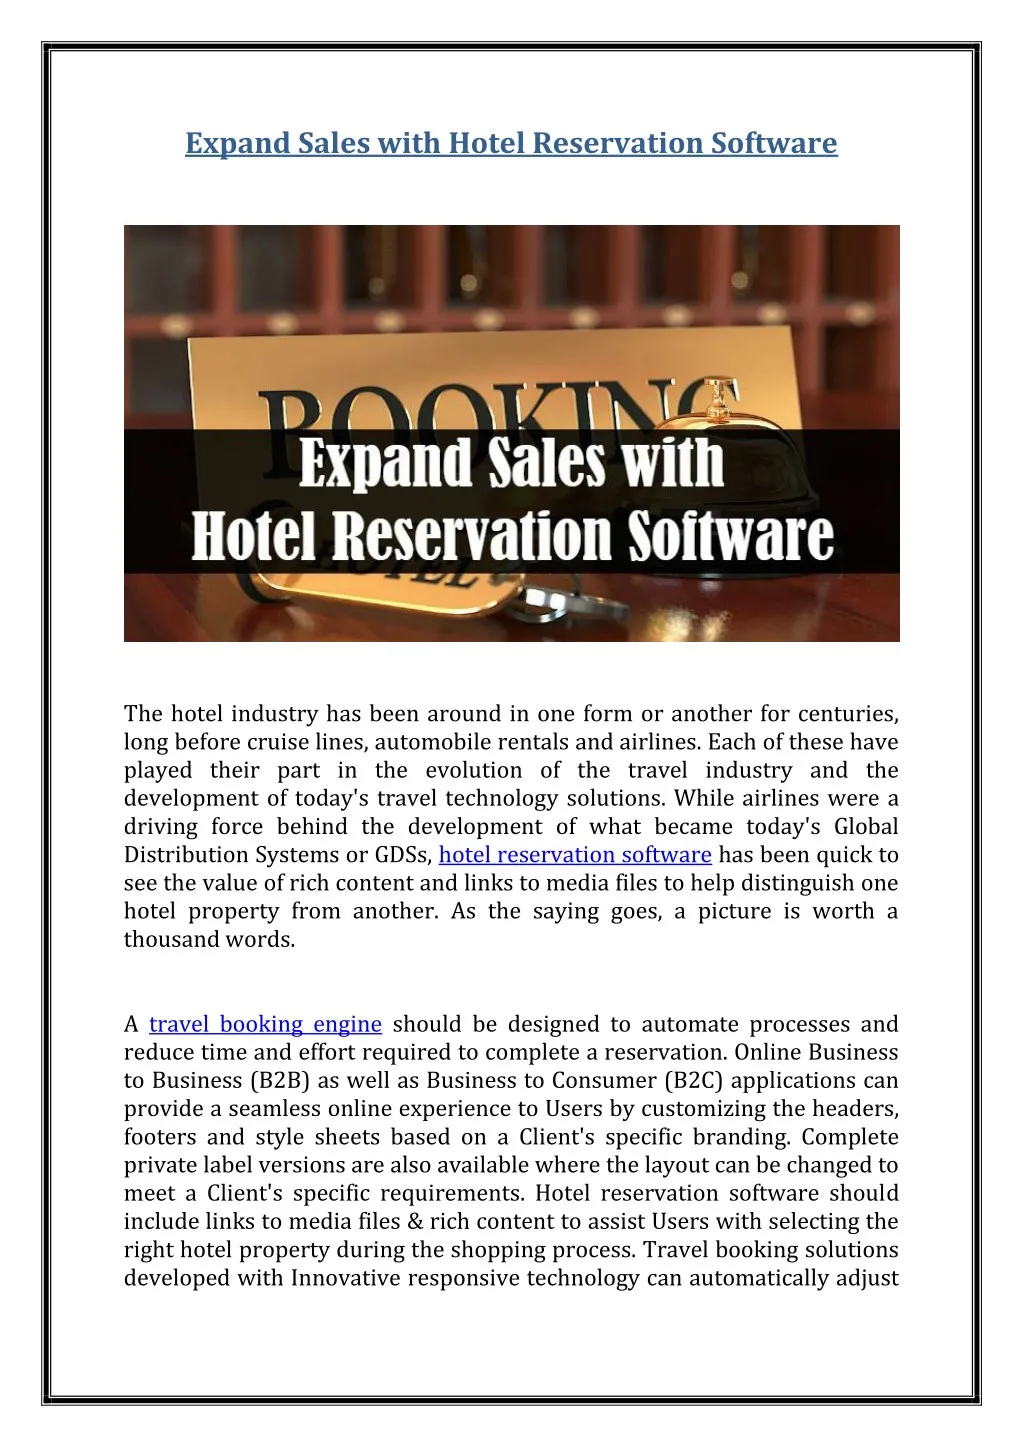 expand sales with hotel reservation software